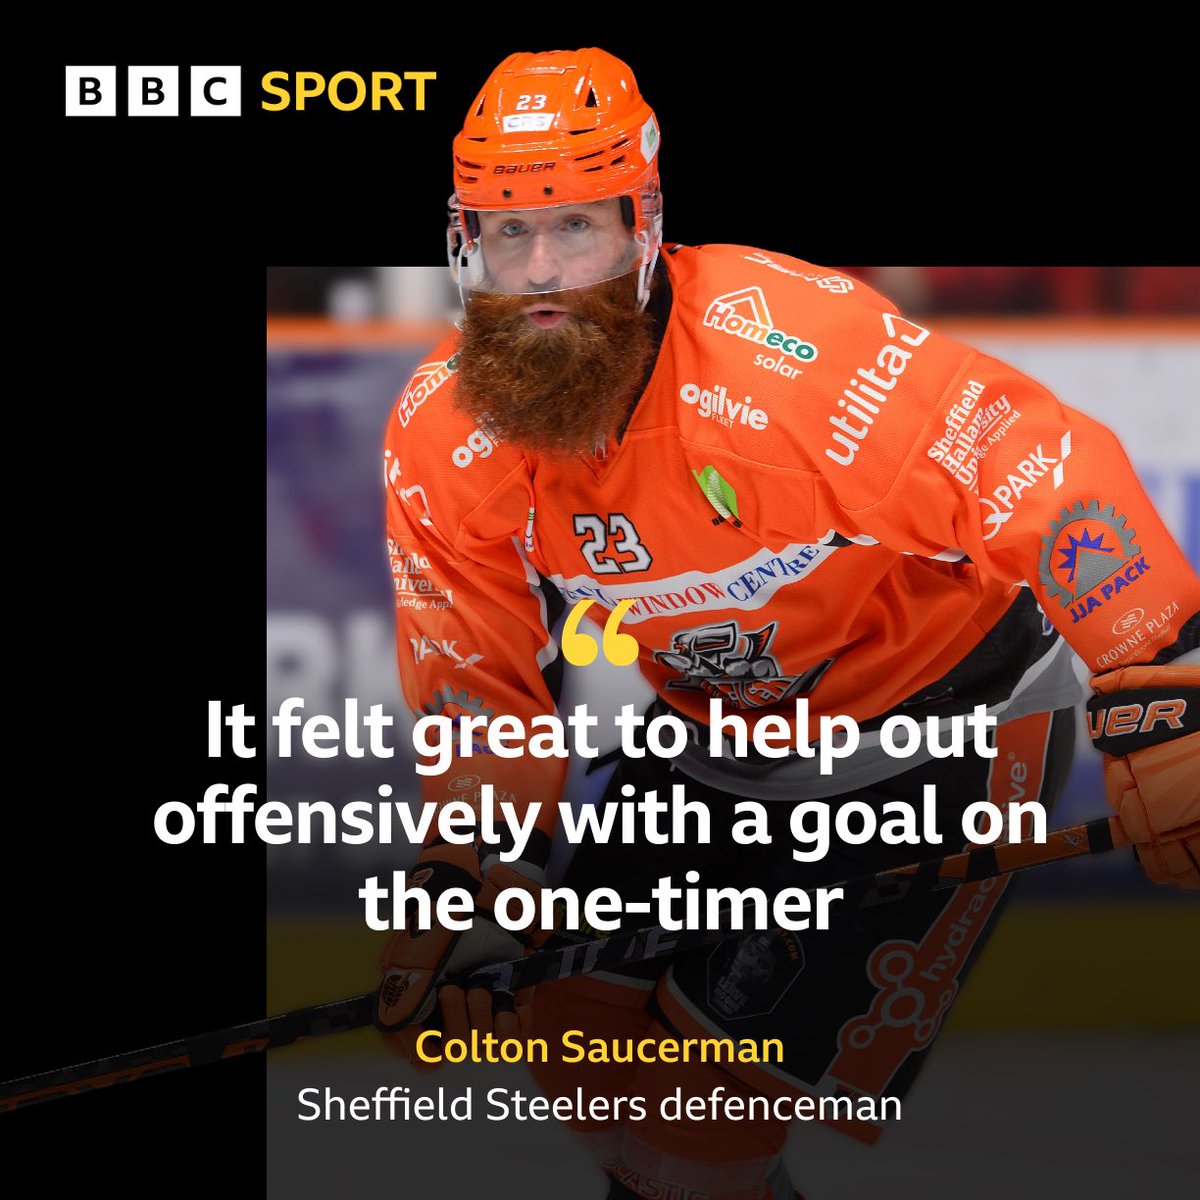 VIDEO: Sheffield Steelers defenceman Colton Saucerman speaks after 3-2 overtime win over Coventry Blaze. The American looks back at his opening goal for the club & explains why he’s as in awe of Patrick Watling as the rest of us! Watch here ➡️ bbc.co.uk/programmes/p0g…